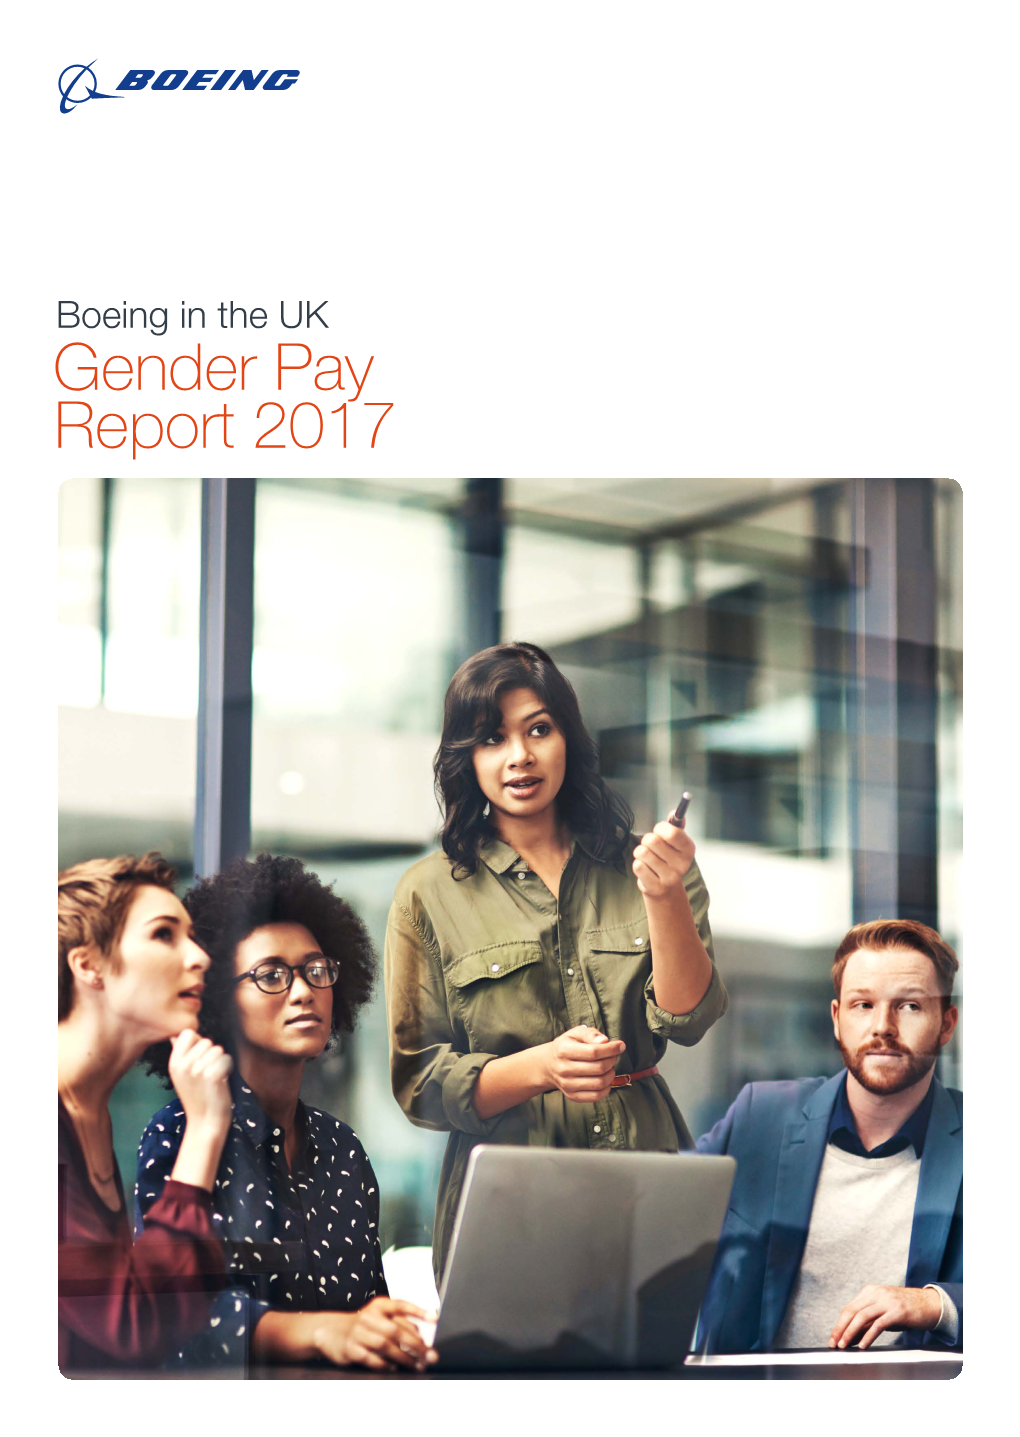 Boeing in the UK Gender Pay Report 2017 Foreword